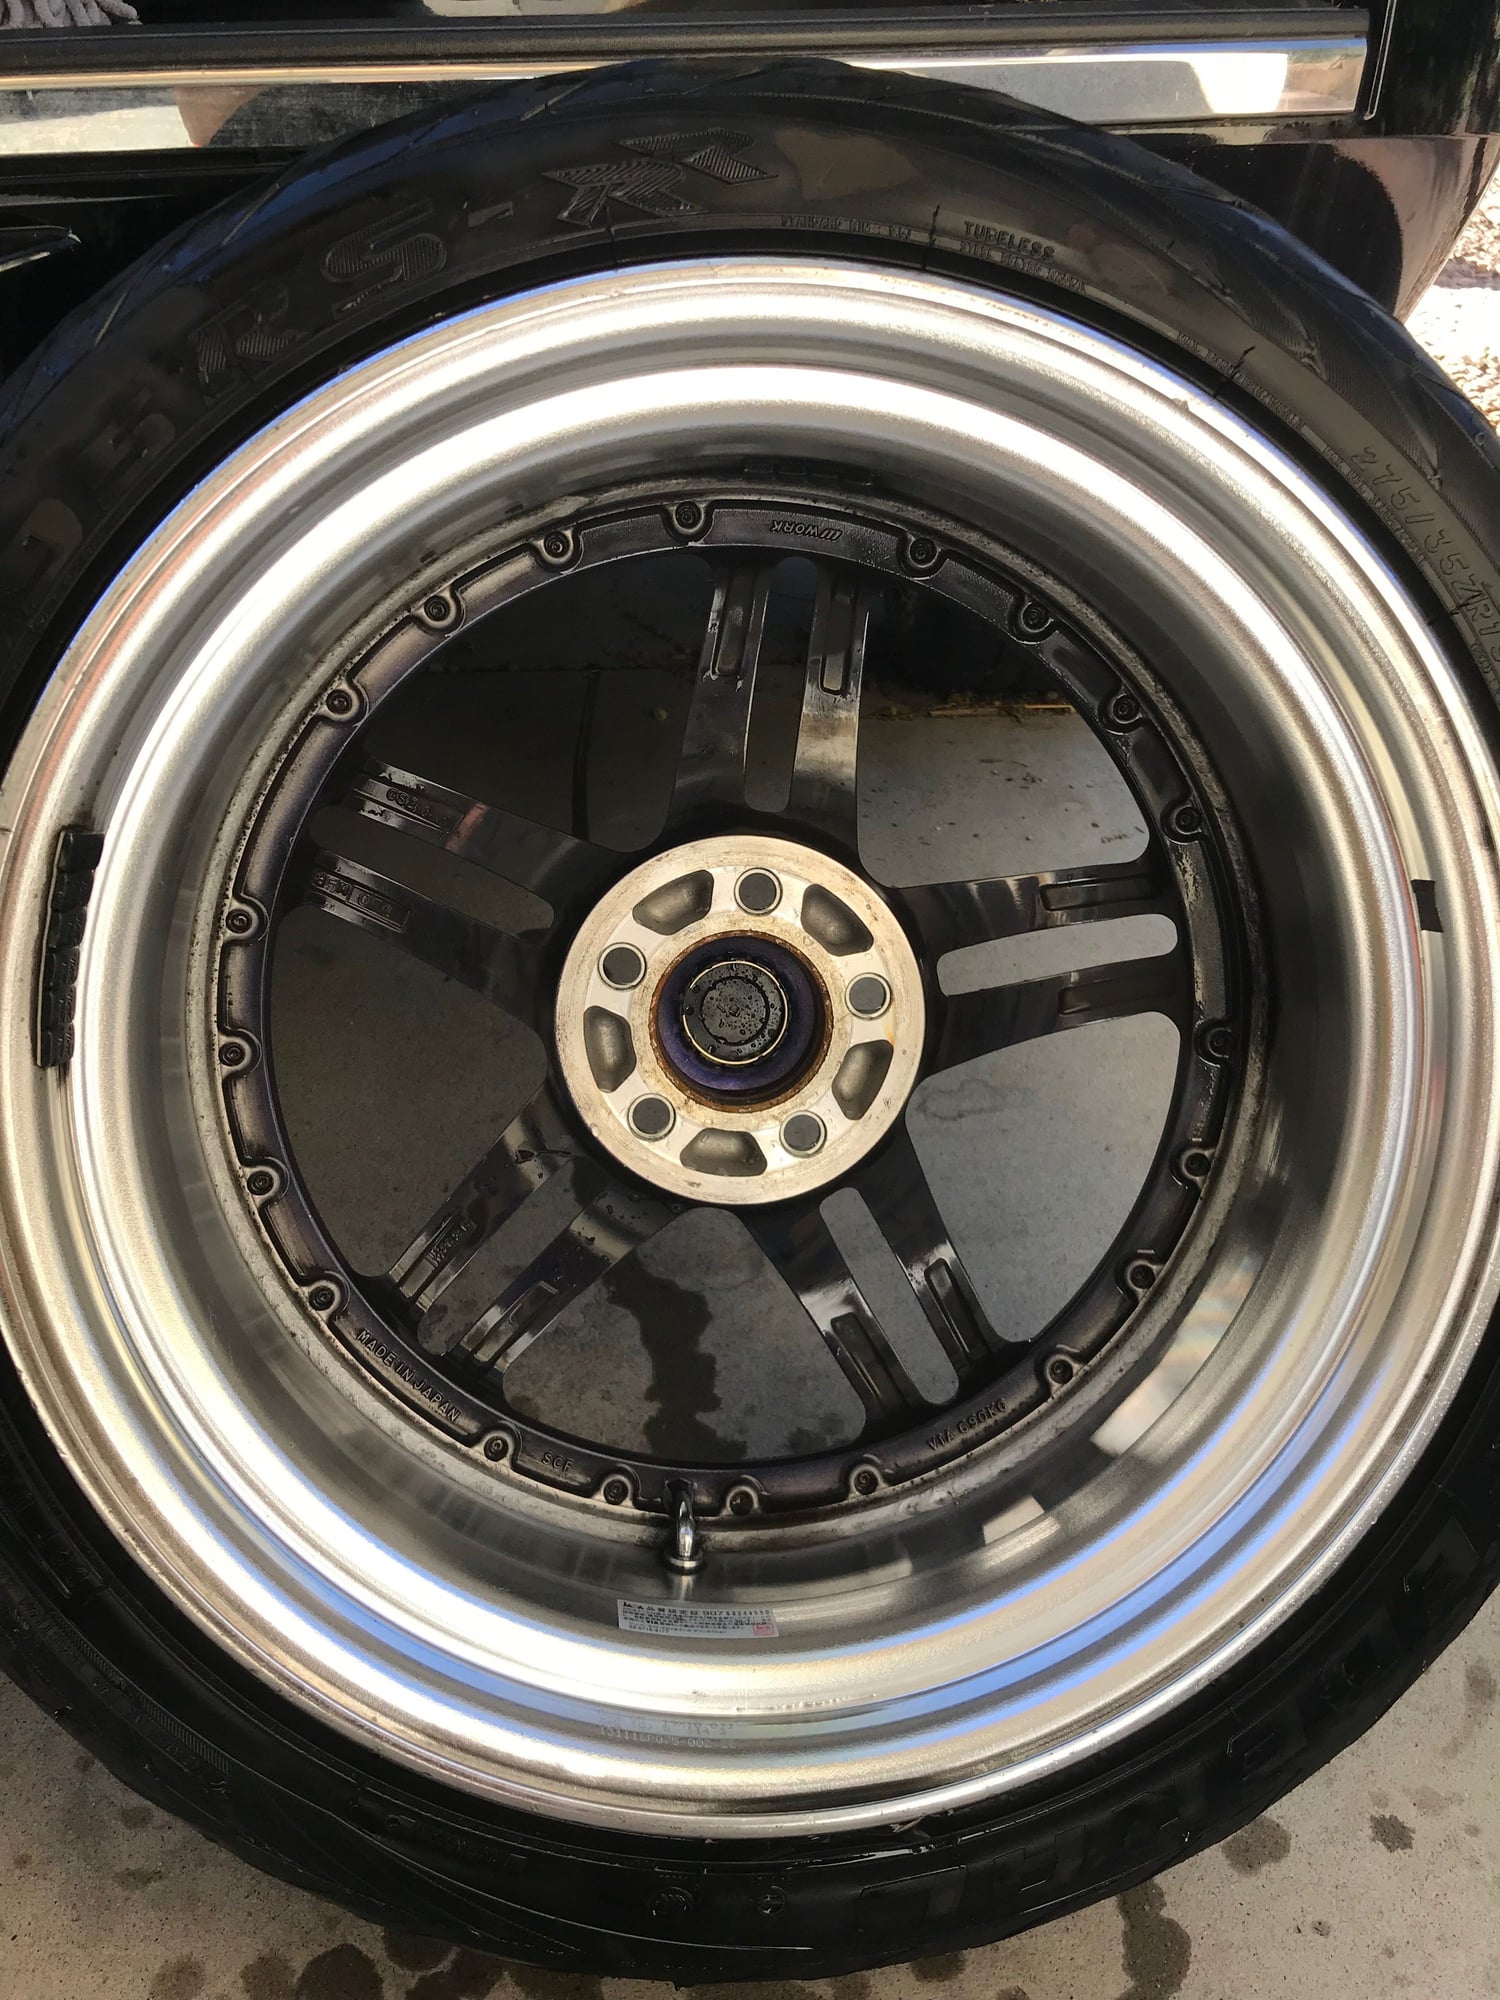 Wheels and Tires/Axles - Rare Work Gnosis GS-2 5x112 19x9 +25 O disc 19x10 +20 O disc w/ Tires - Used - San Diego, CA 91913, United States